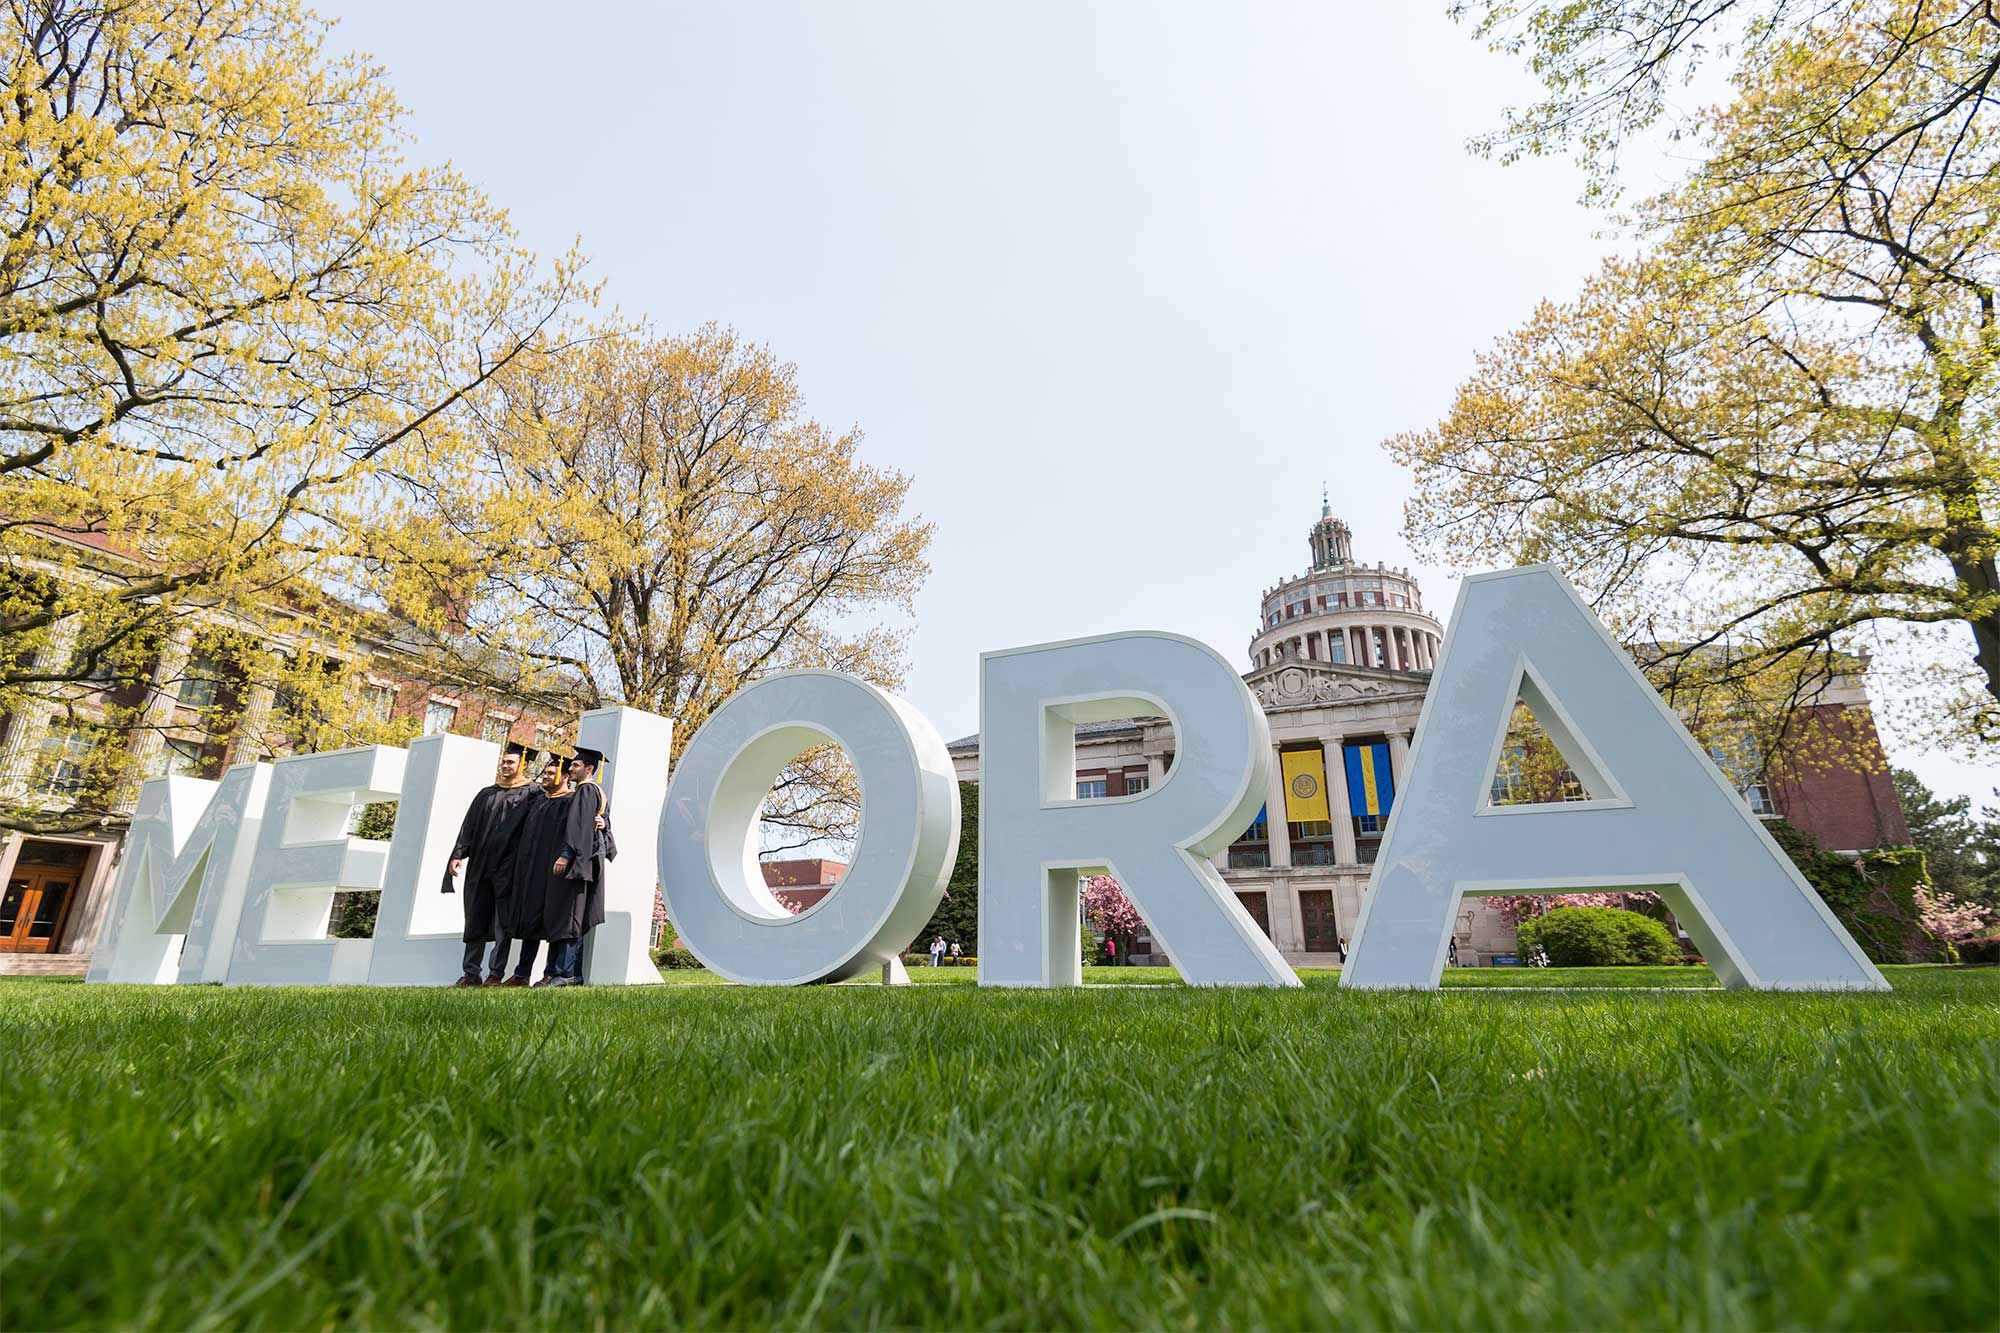 graduates in cap and gown posing in front of large white MELIORA letters in quad